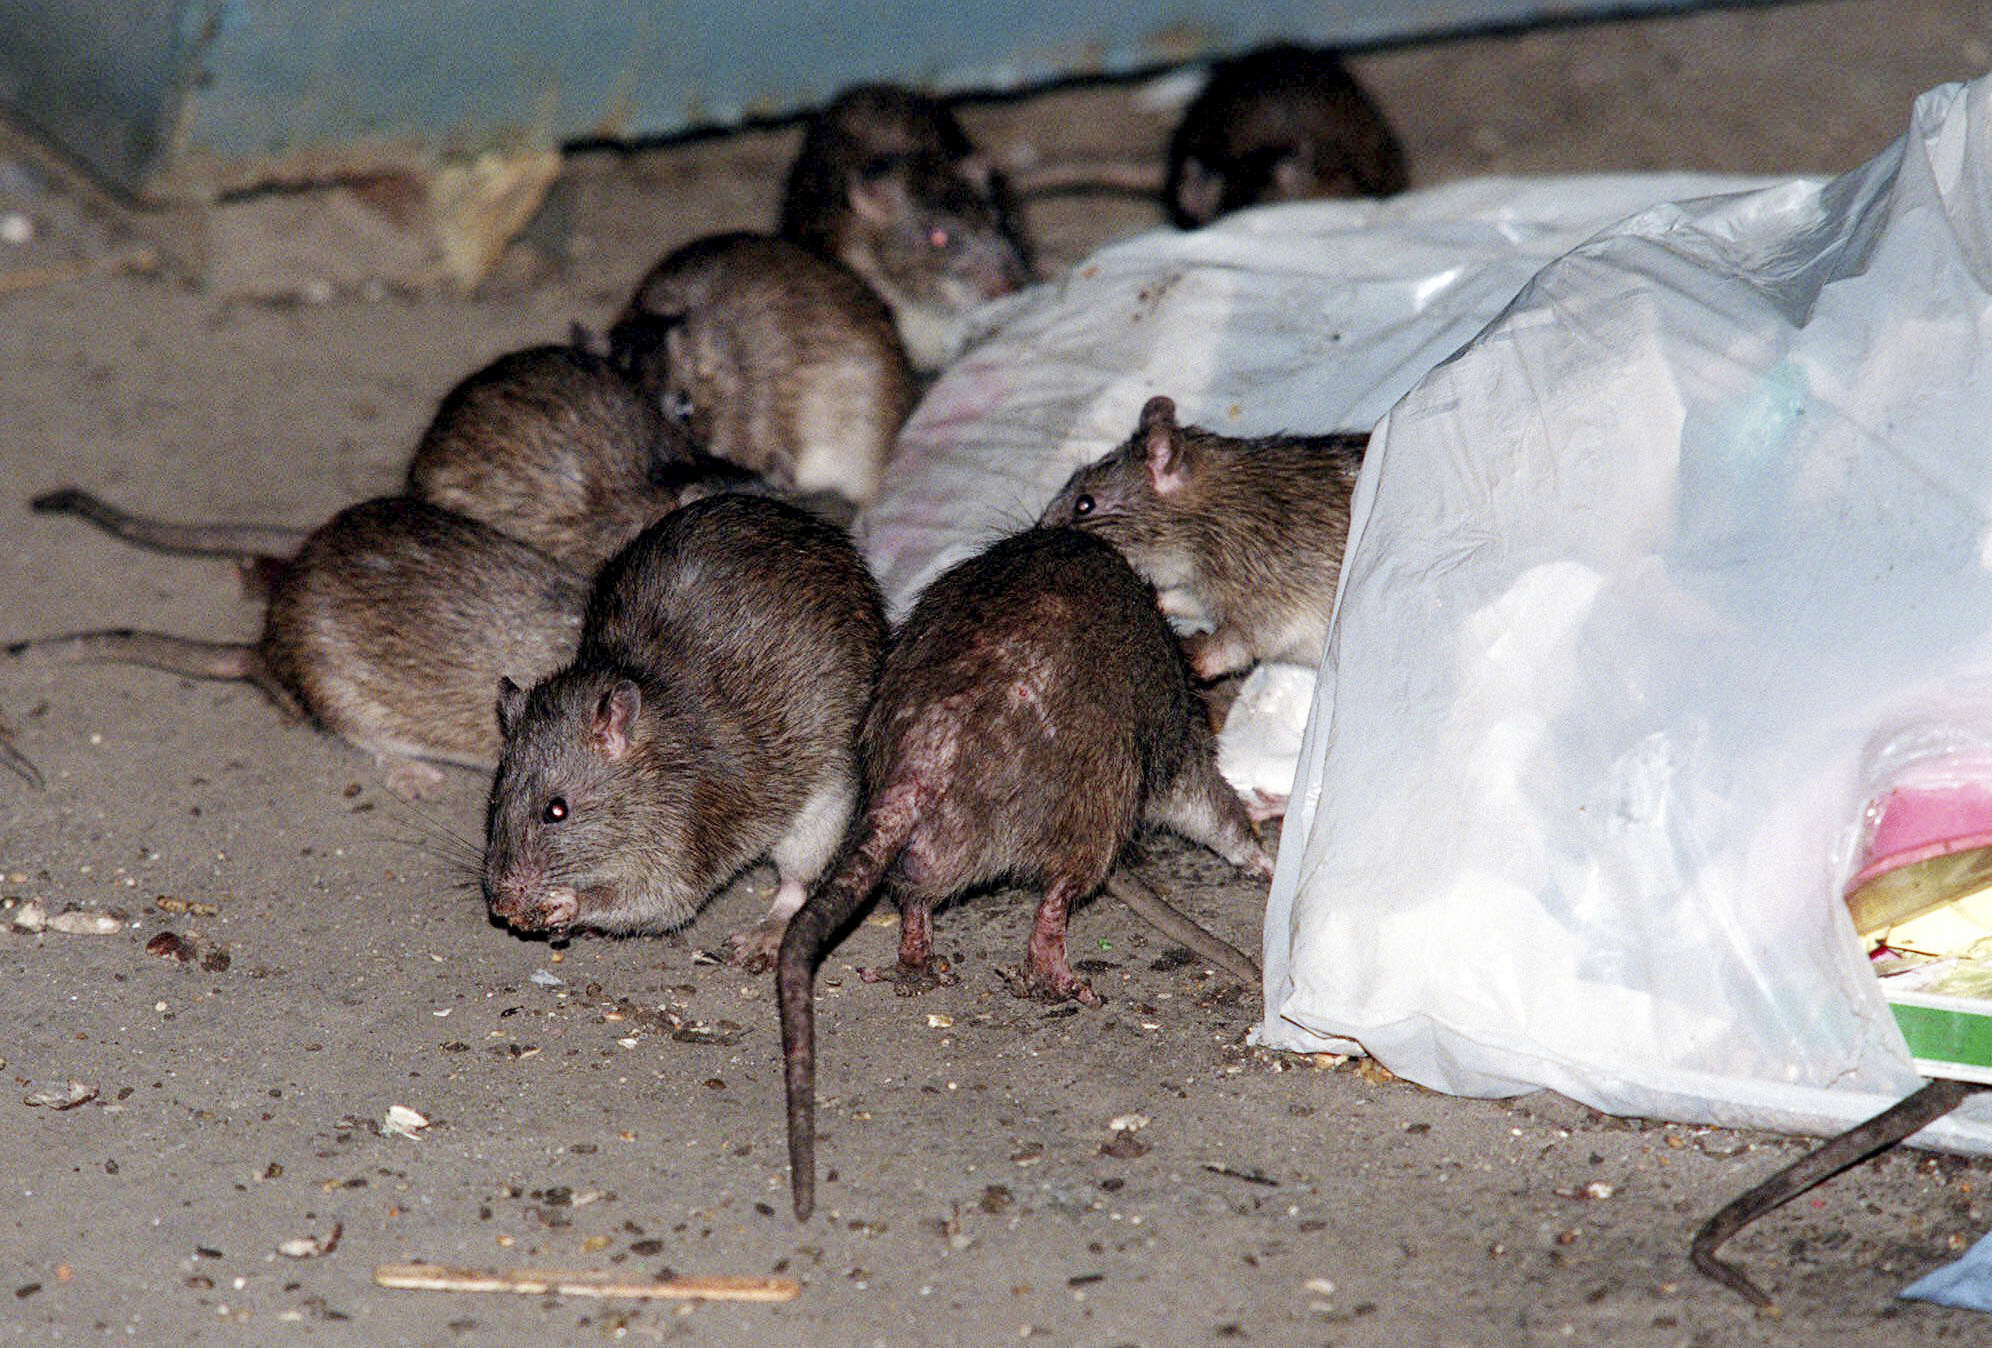 Rats swarm around a bag of garbage near a dumpster in New York, July 7, 2000.